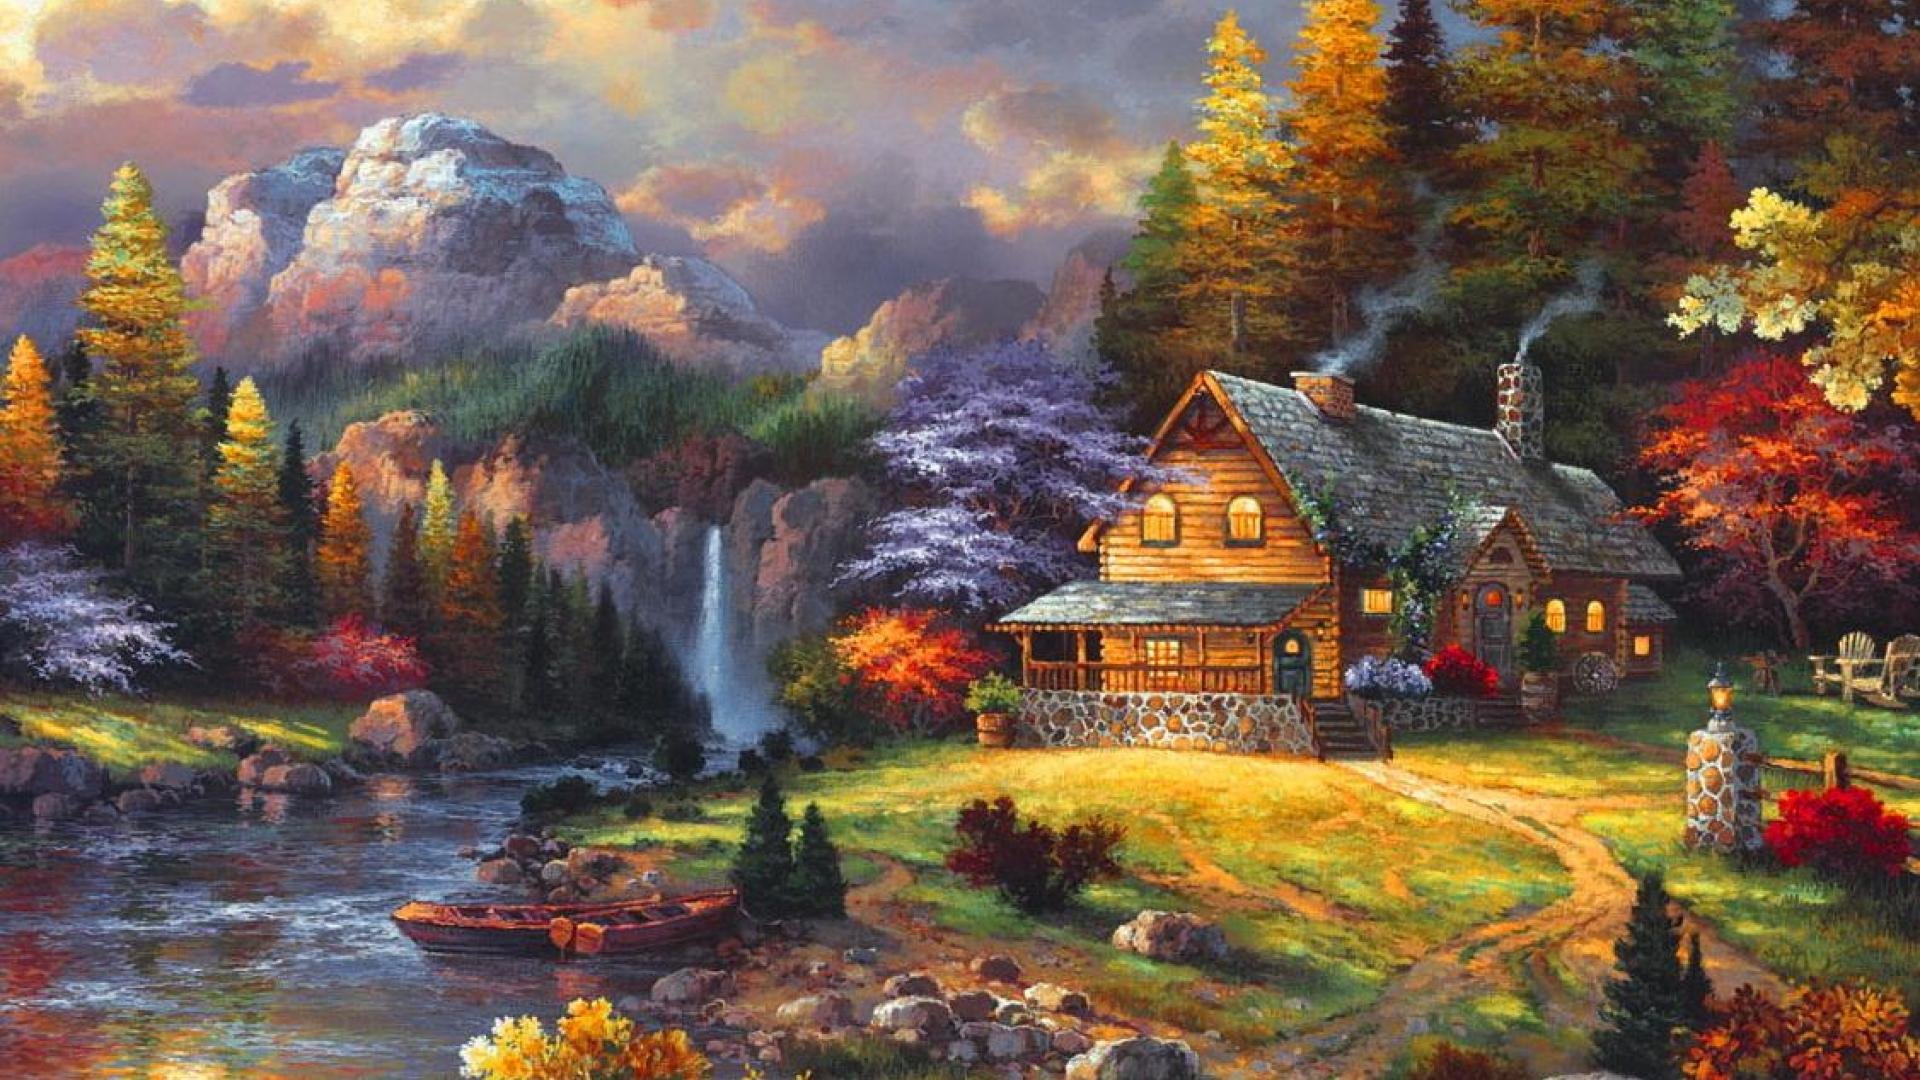 19 Fresh Cottage Pictures MDB70 100 Quality HD Wallpapers